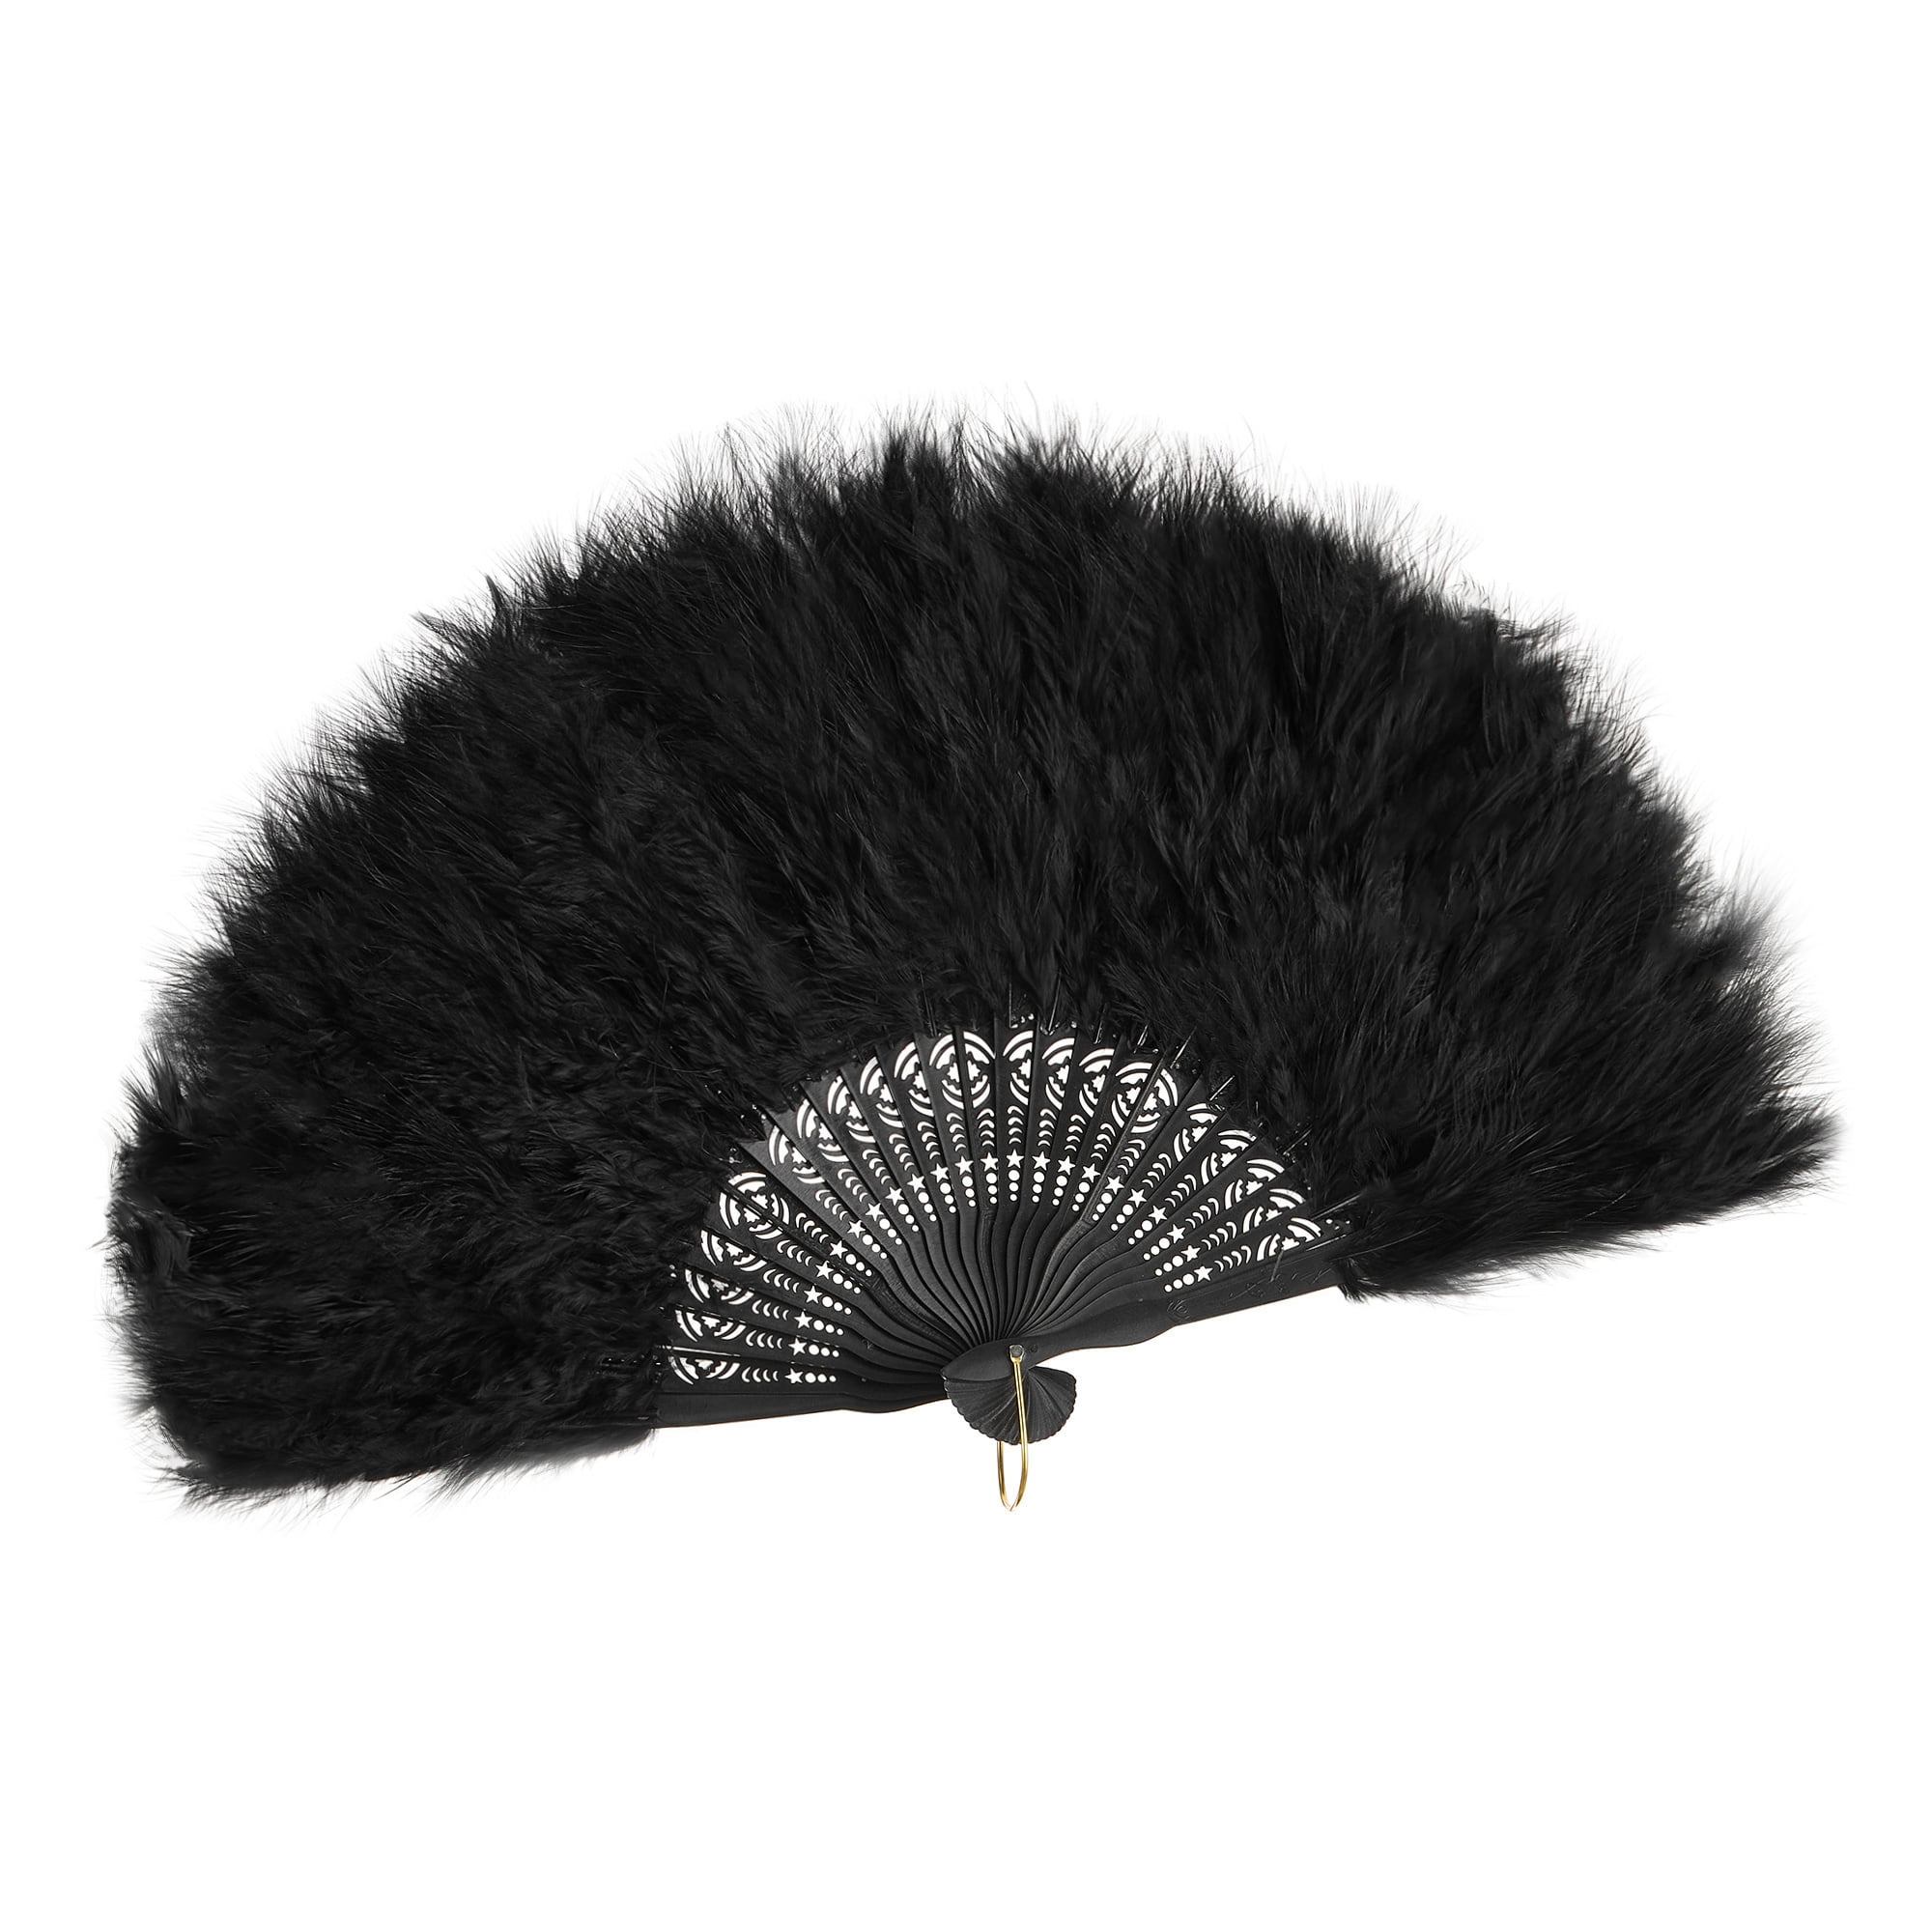 Sprifallbaby Feather Fan, 1920s Vintage Foldable Fan, Lightweight feather  Fans for Burlesque, Dancing Show 